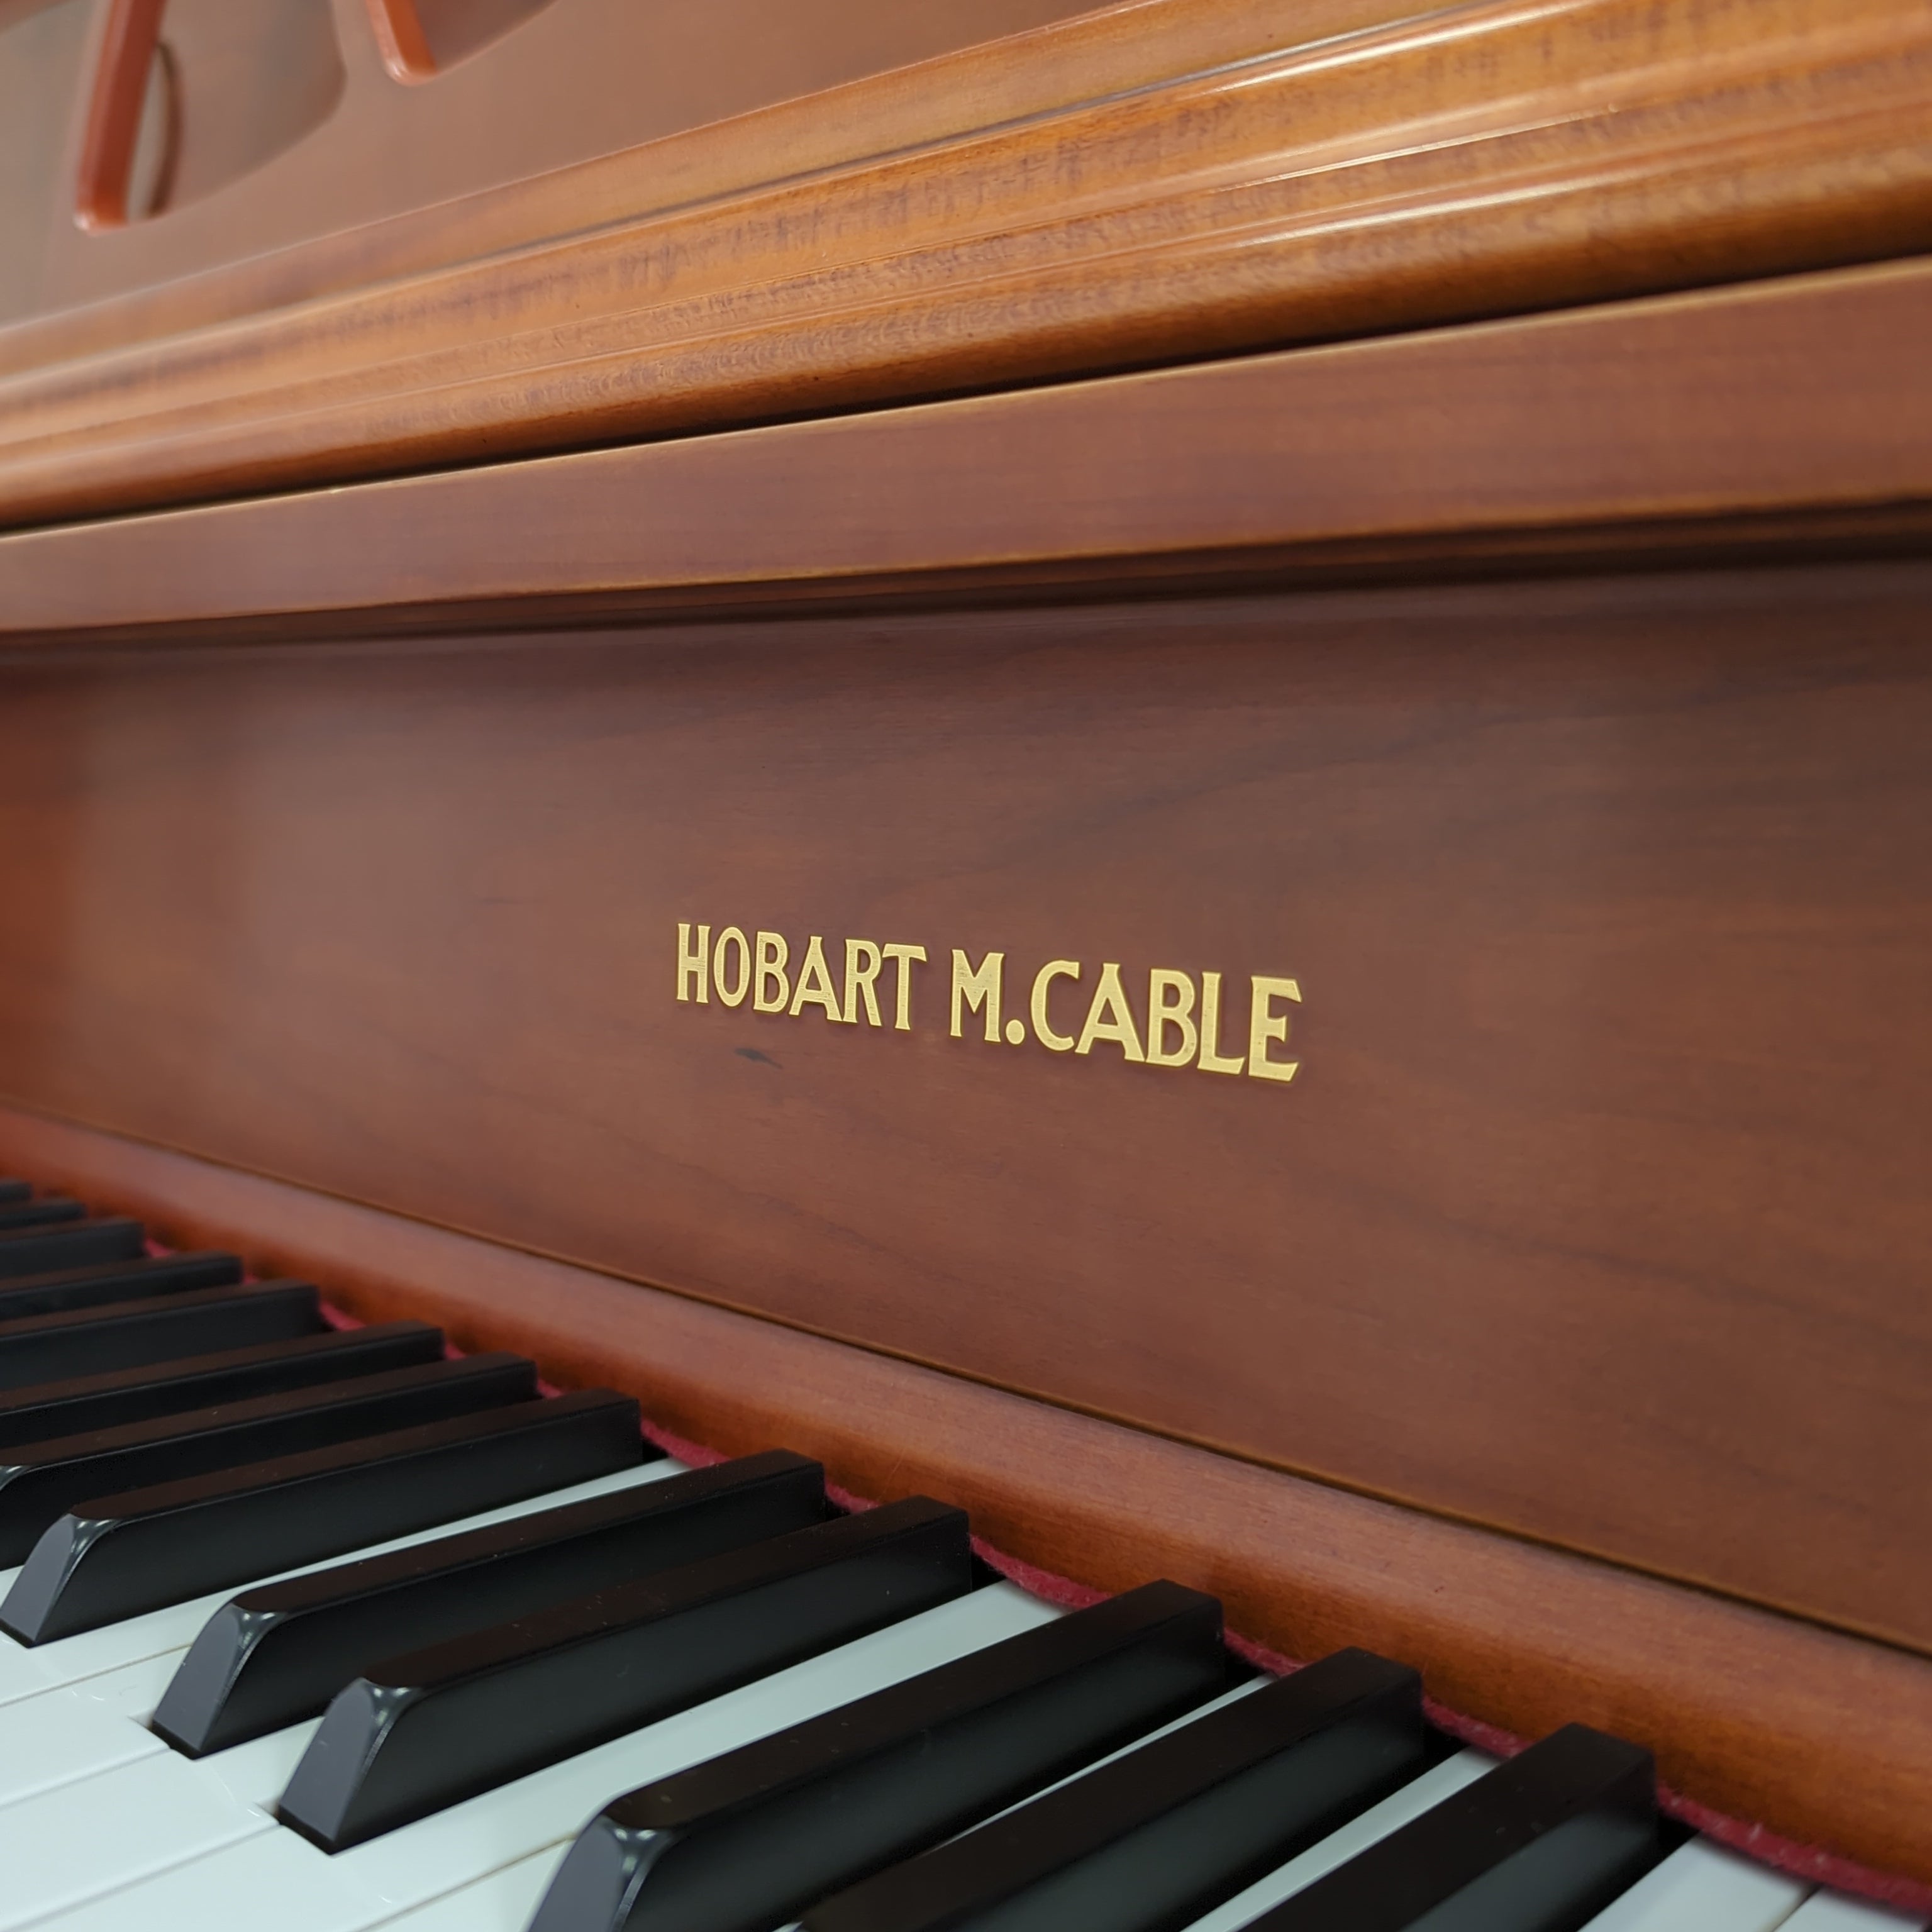 hobart m cable upright piano serial number lookup